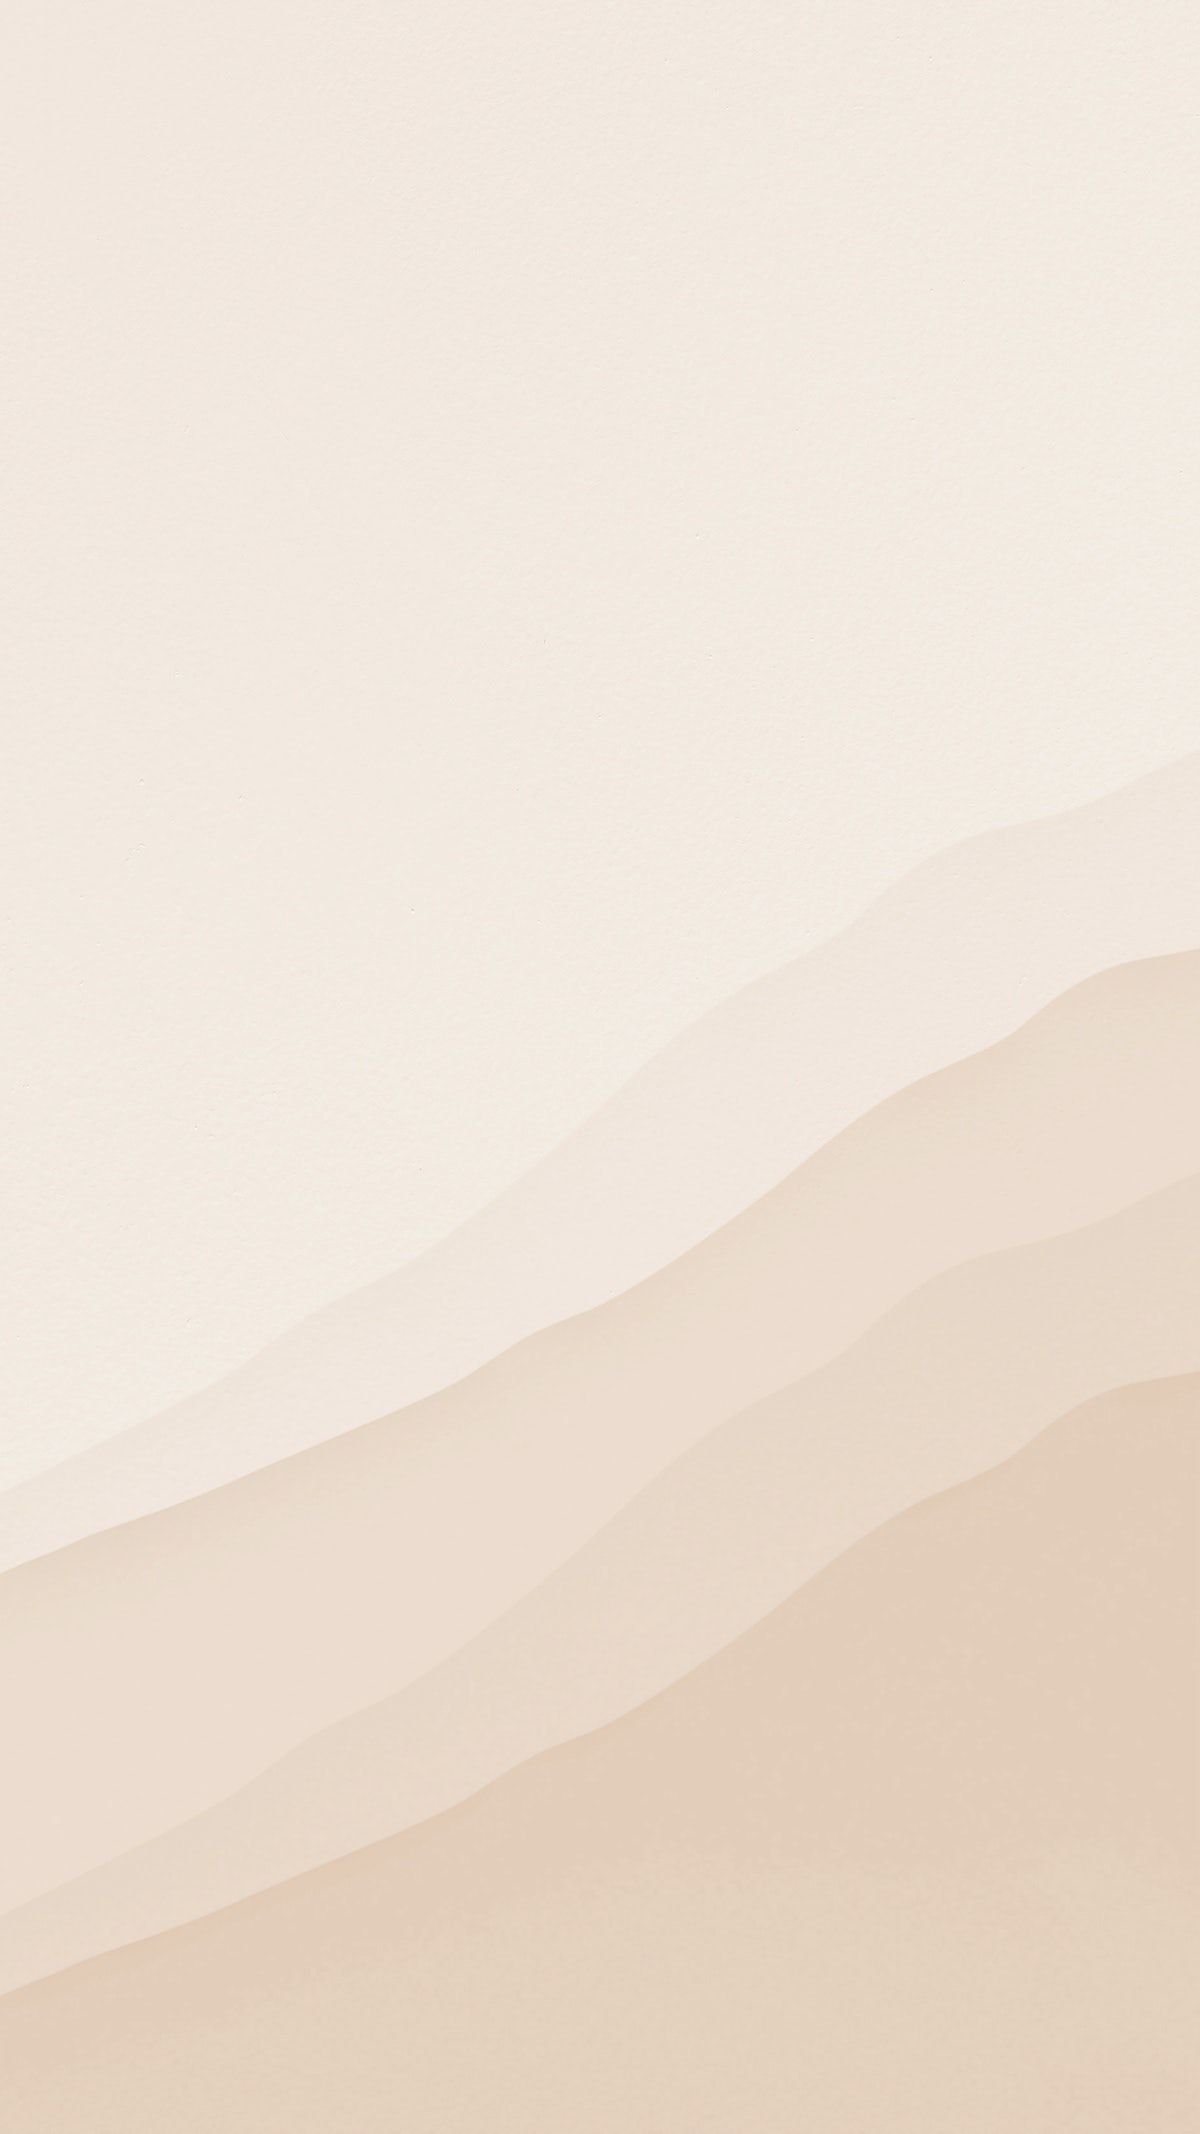 Download free illustration of Beige abstract wallpaper background image by Nun. Pink wallpaper background, Abstract wallpaper background, Color wallpaper iphone